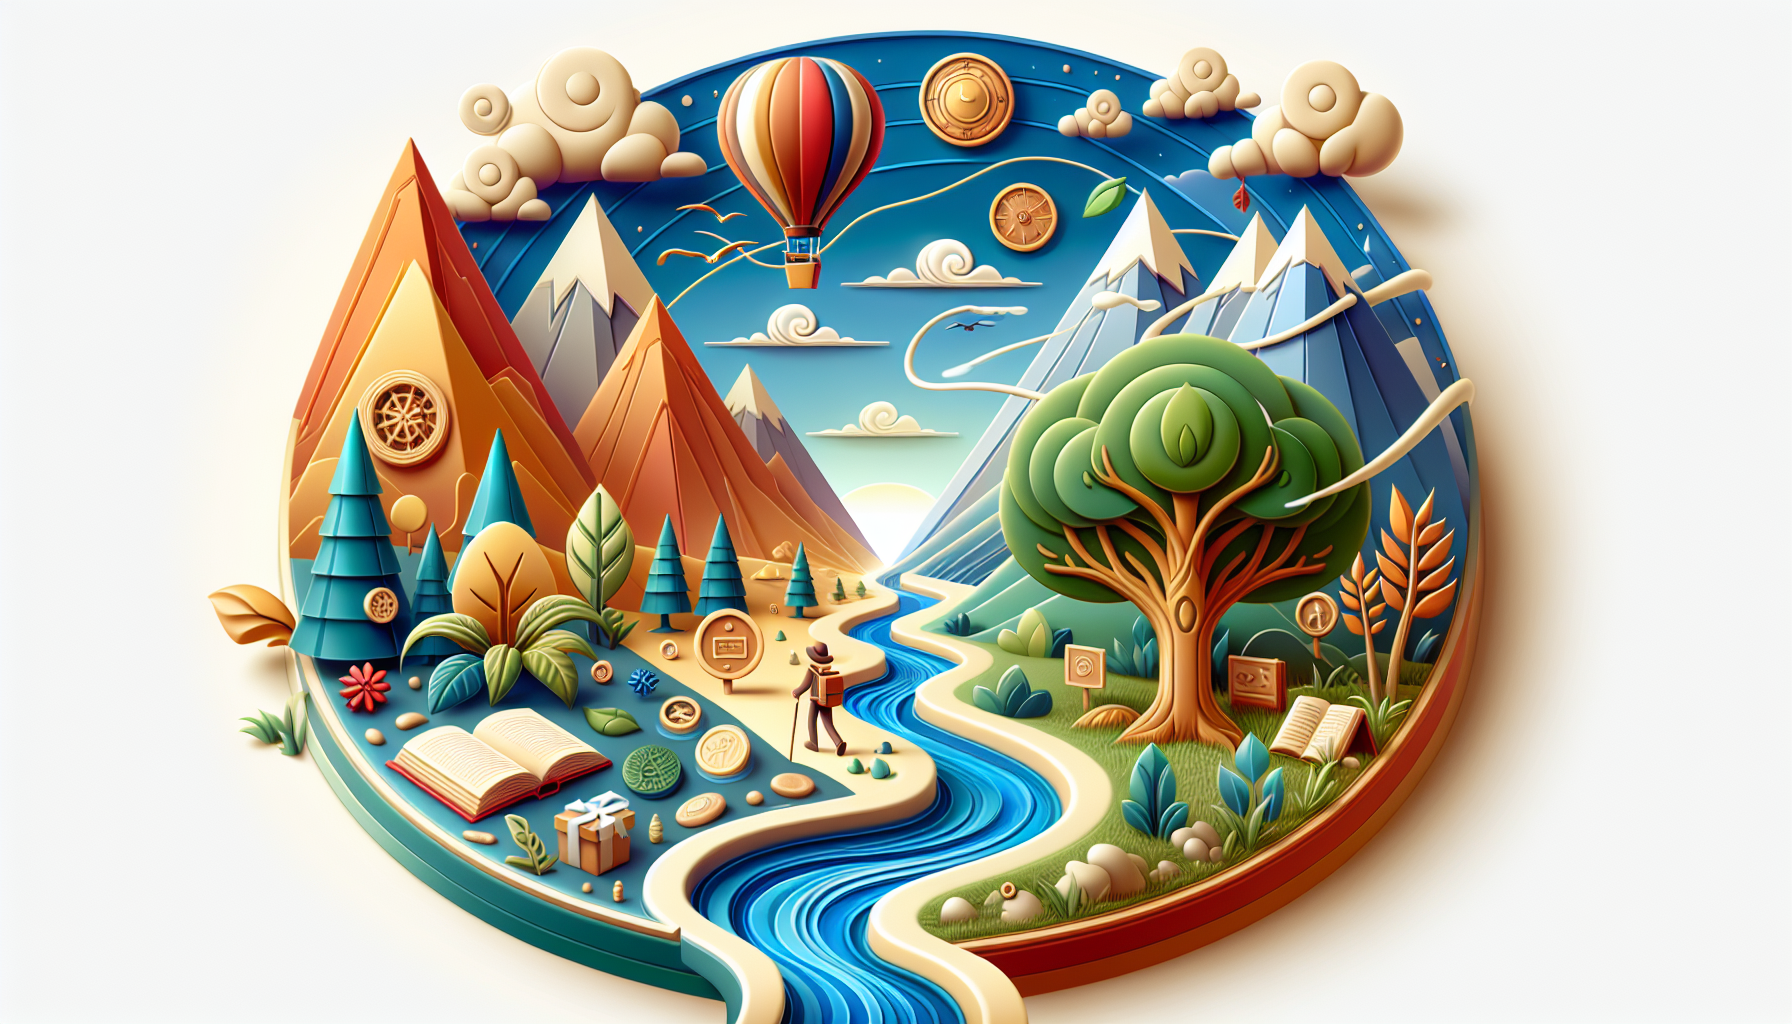 Render a vivid and contemporary illustration encapsulating the spirit of an animated journey imbued with character development. The picture should carefully balance elements of high-spirited adventure – mountains, rivers, forests, a hovering air balloon, and a trail that signifies progress. Along this trail should be symbolic items representing different stages of character growth: a small seedling sprouting into a mighty tree, a closed book to an open one, etc. This visual narrative should be presented in an array of vibrant, inviting colors to reflect its modern style. No text should be included.